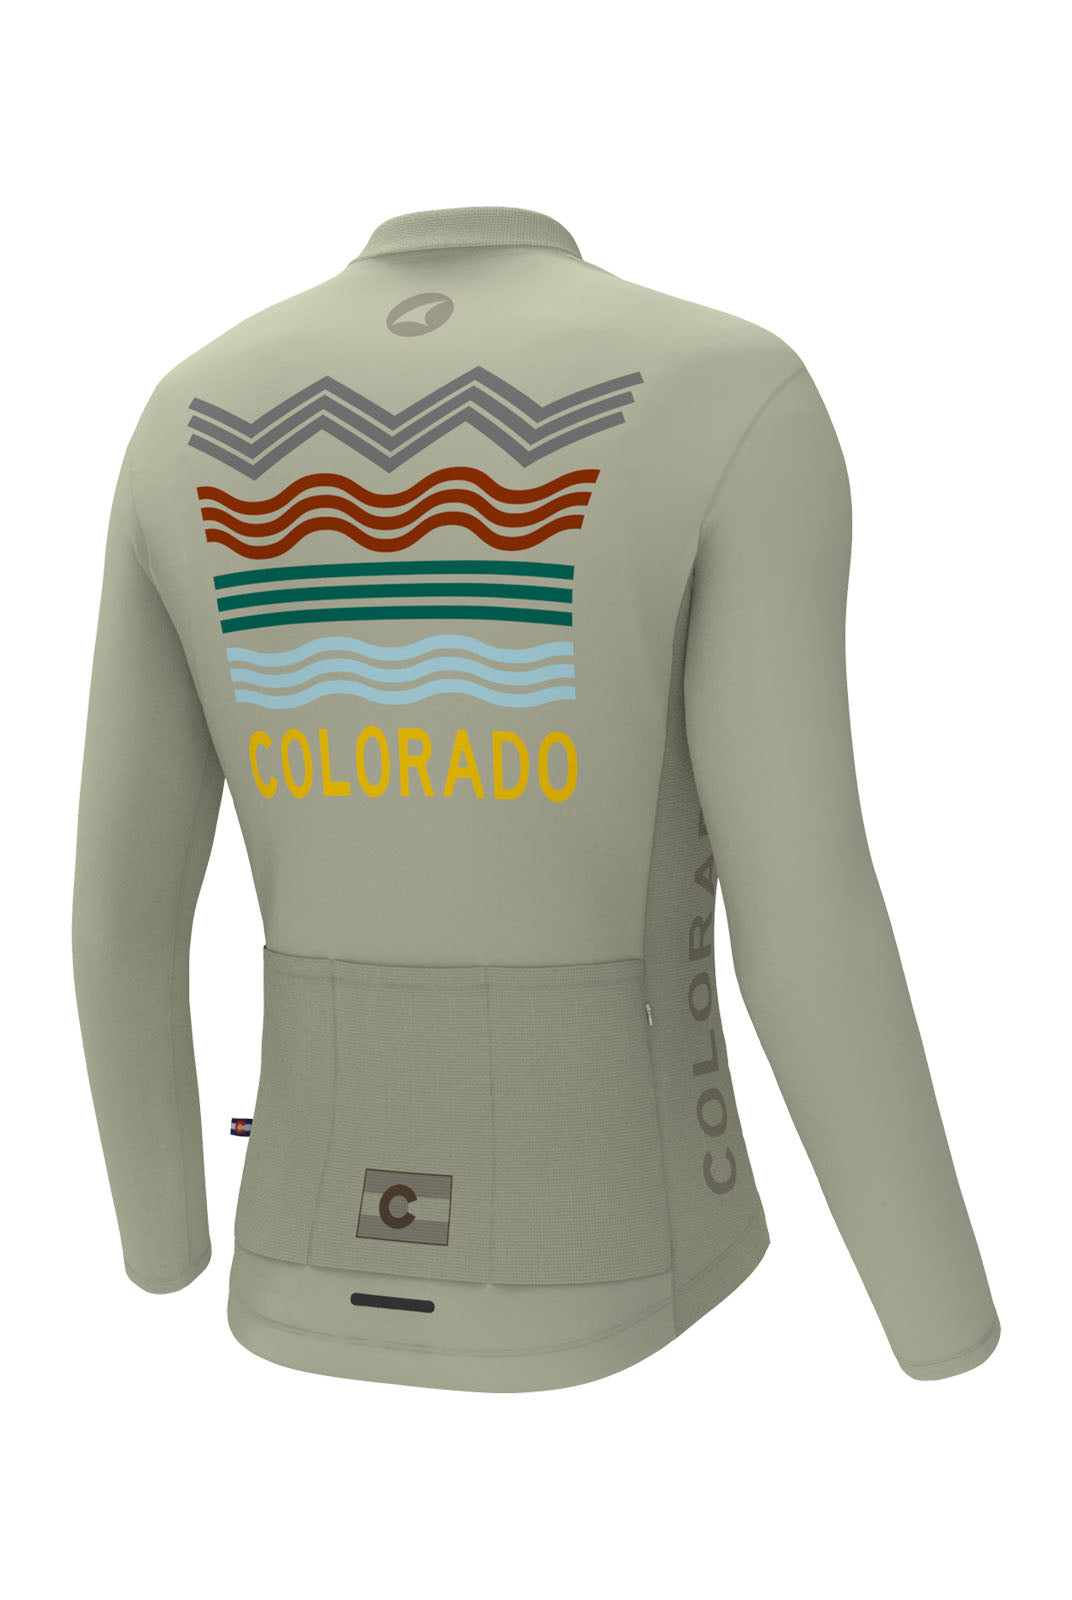 Men's White Long Sleeve Colorado Cycling Jersey - Ascent Back View